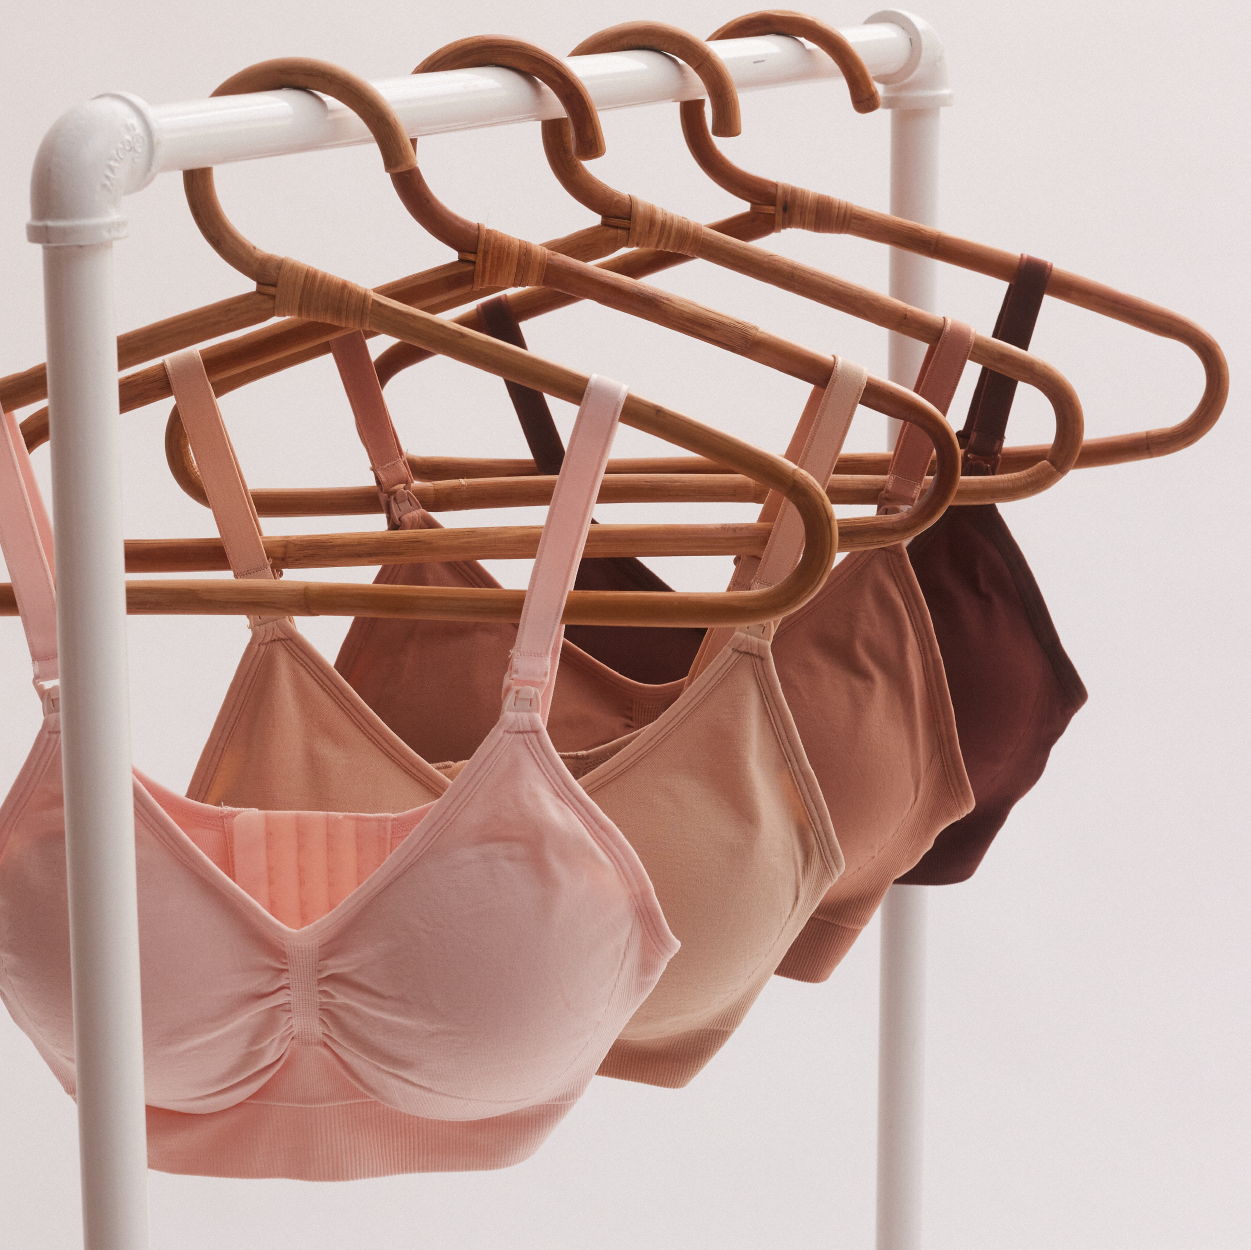 5 Bras With A Little Something Special – Bra Doctor's Blog